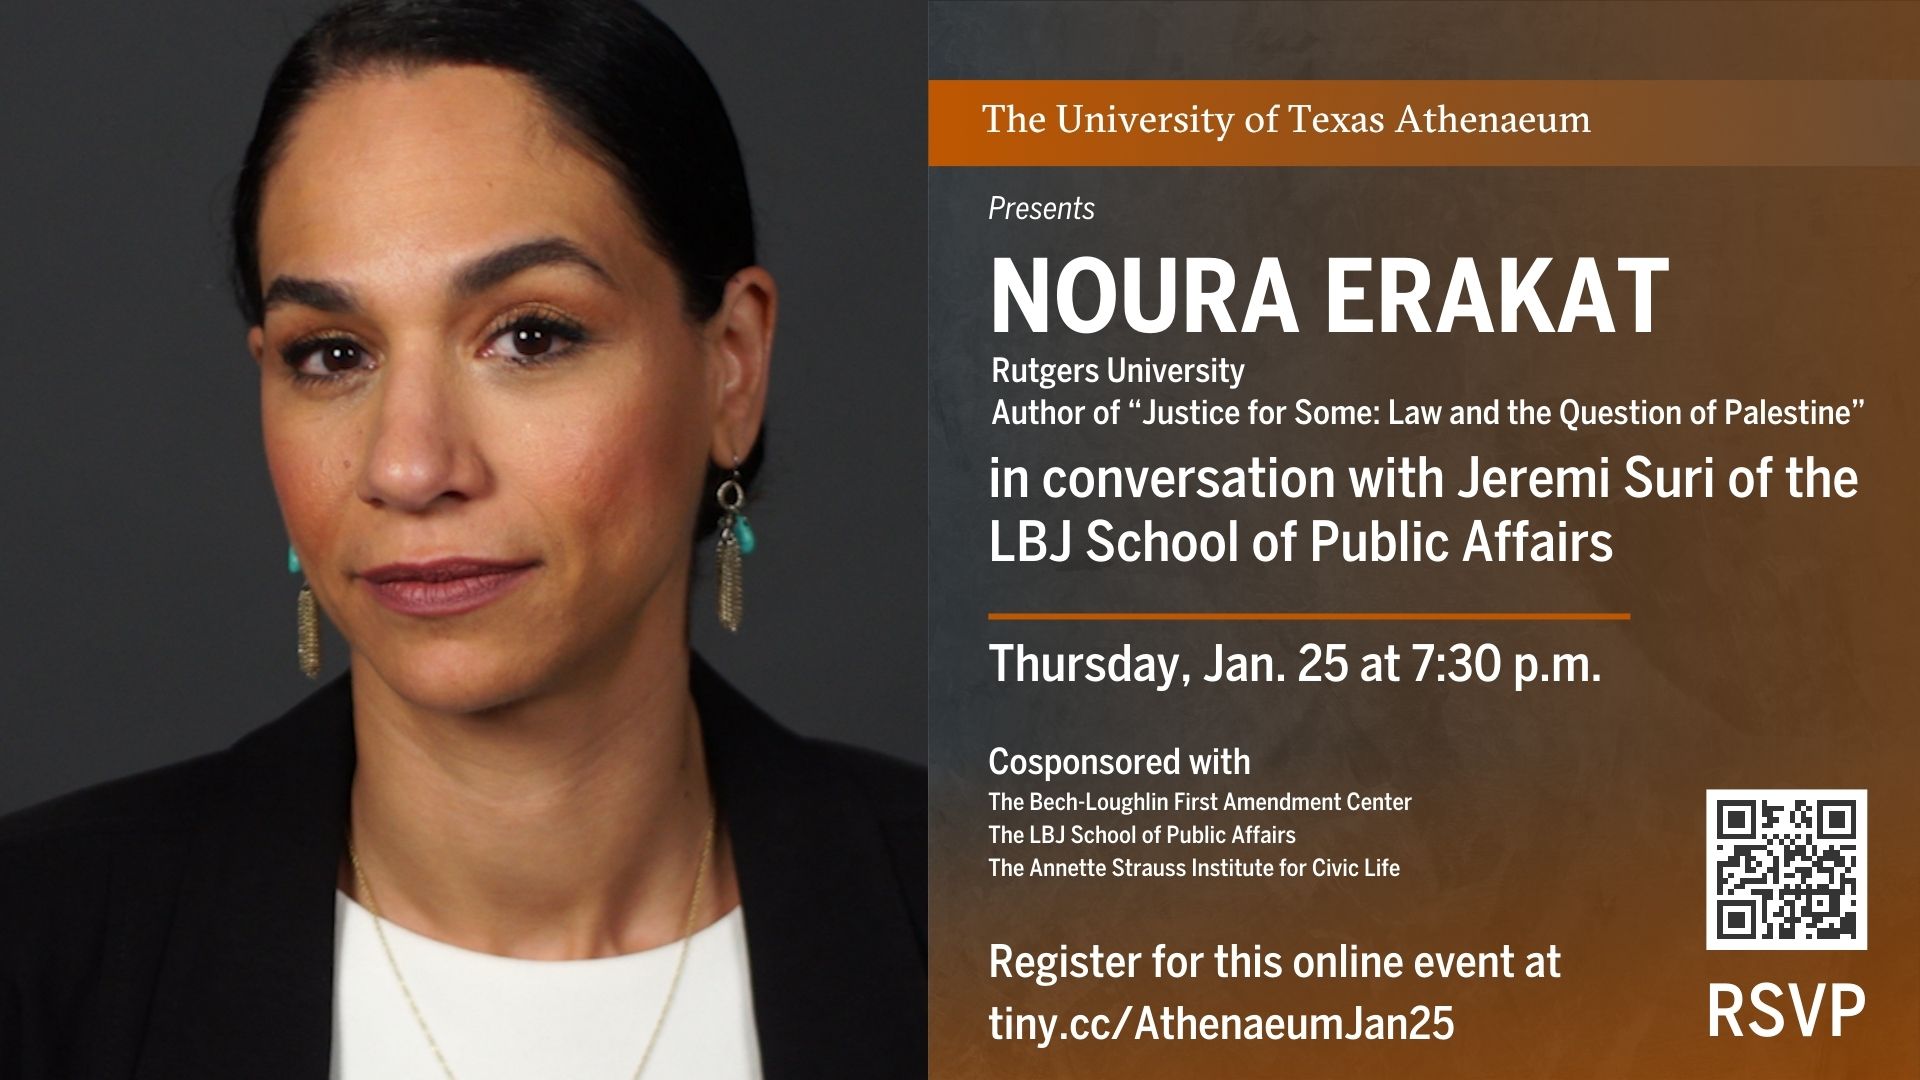 Poster for event on Jan. 25 with Prof. Noura Erakat